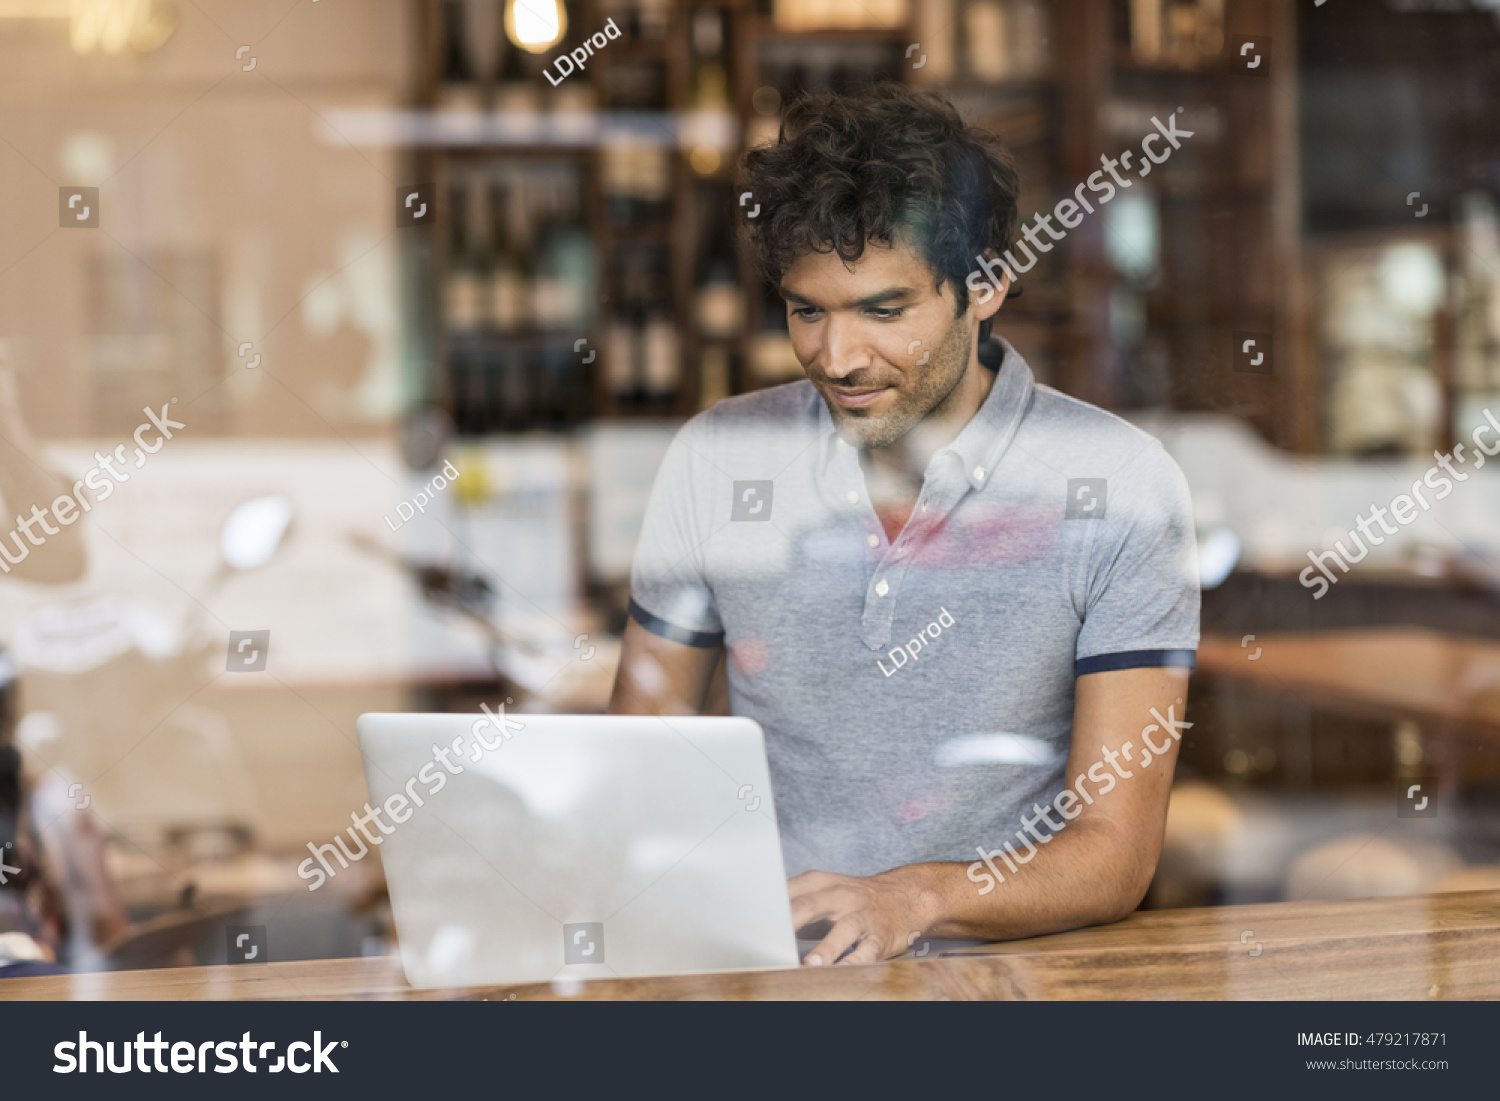 Young man sitting in coffee bar. Working on laptop. Reflection through the glass #479217871